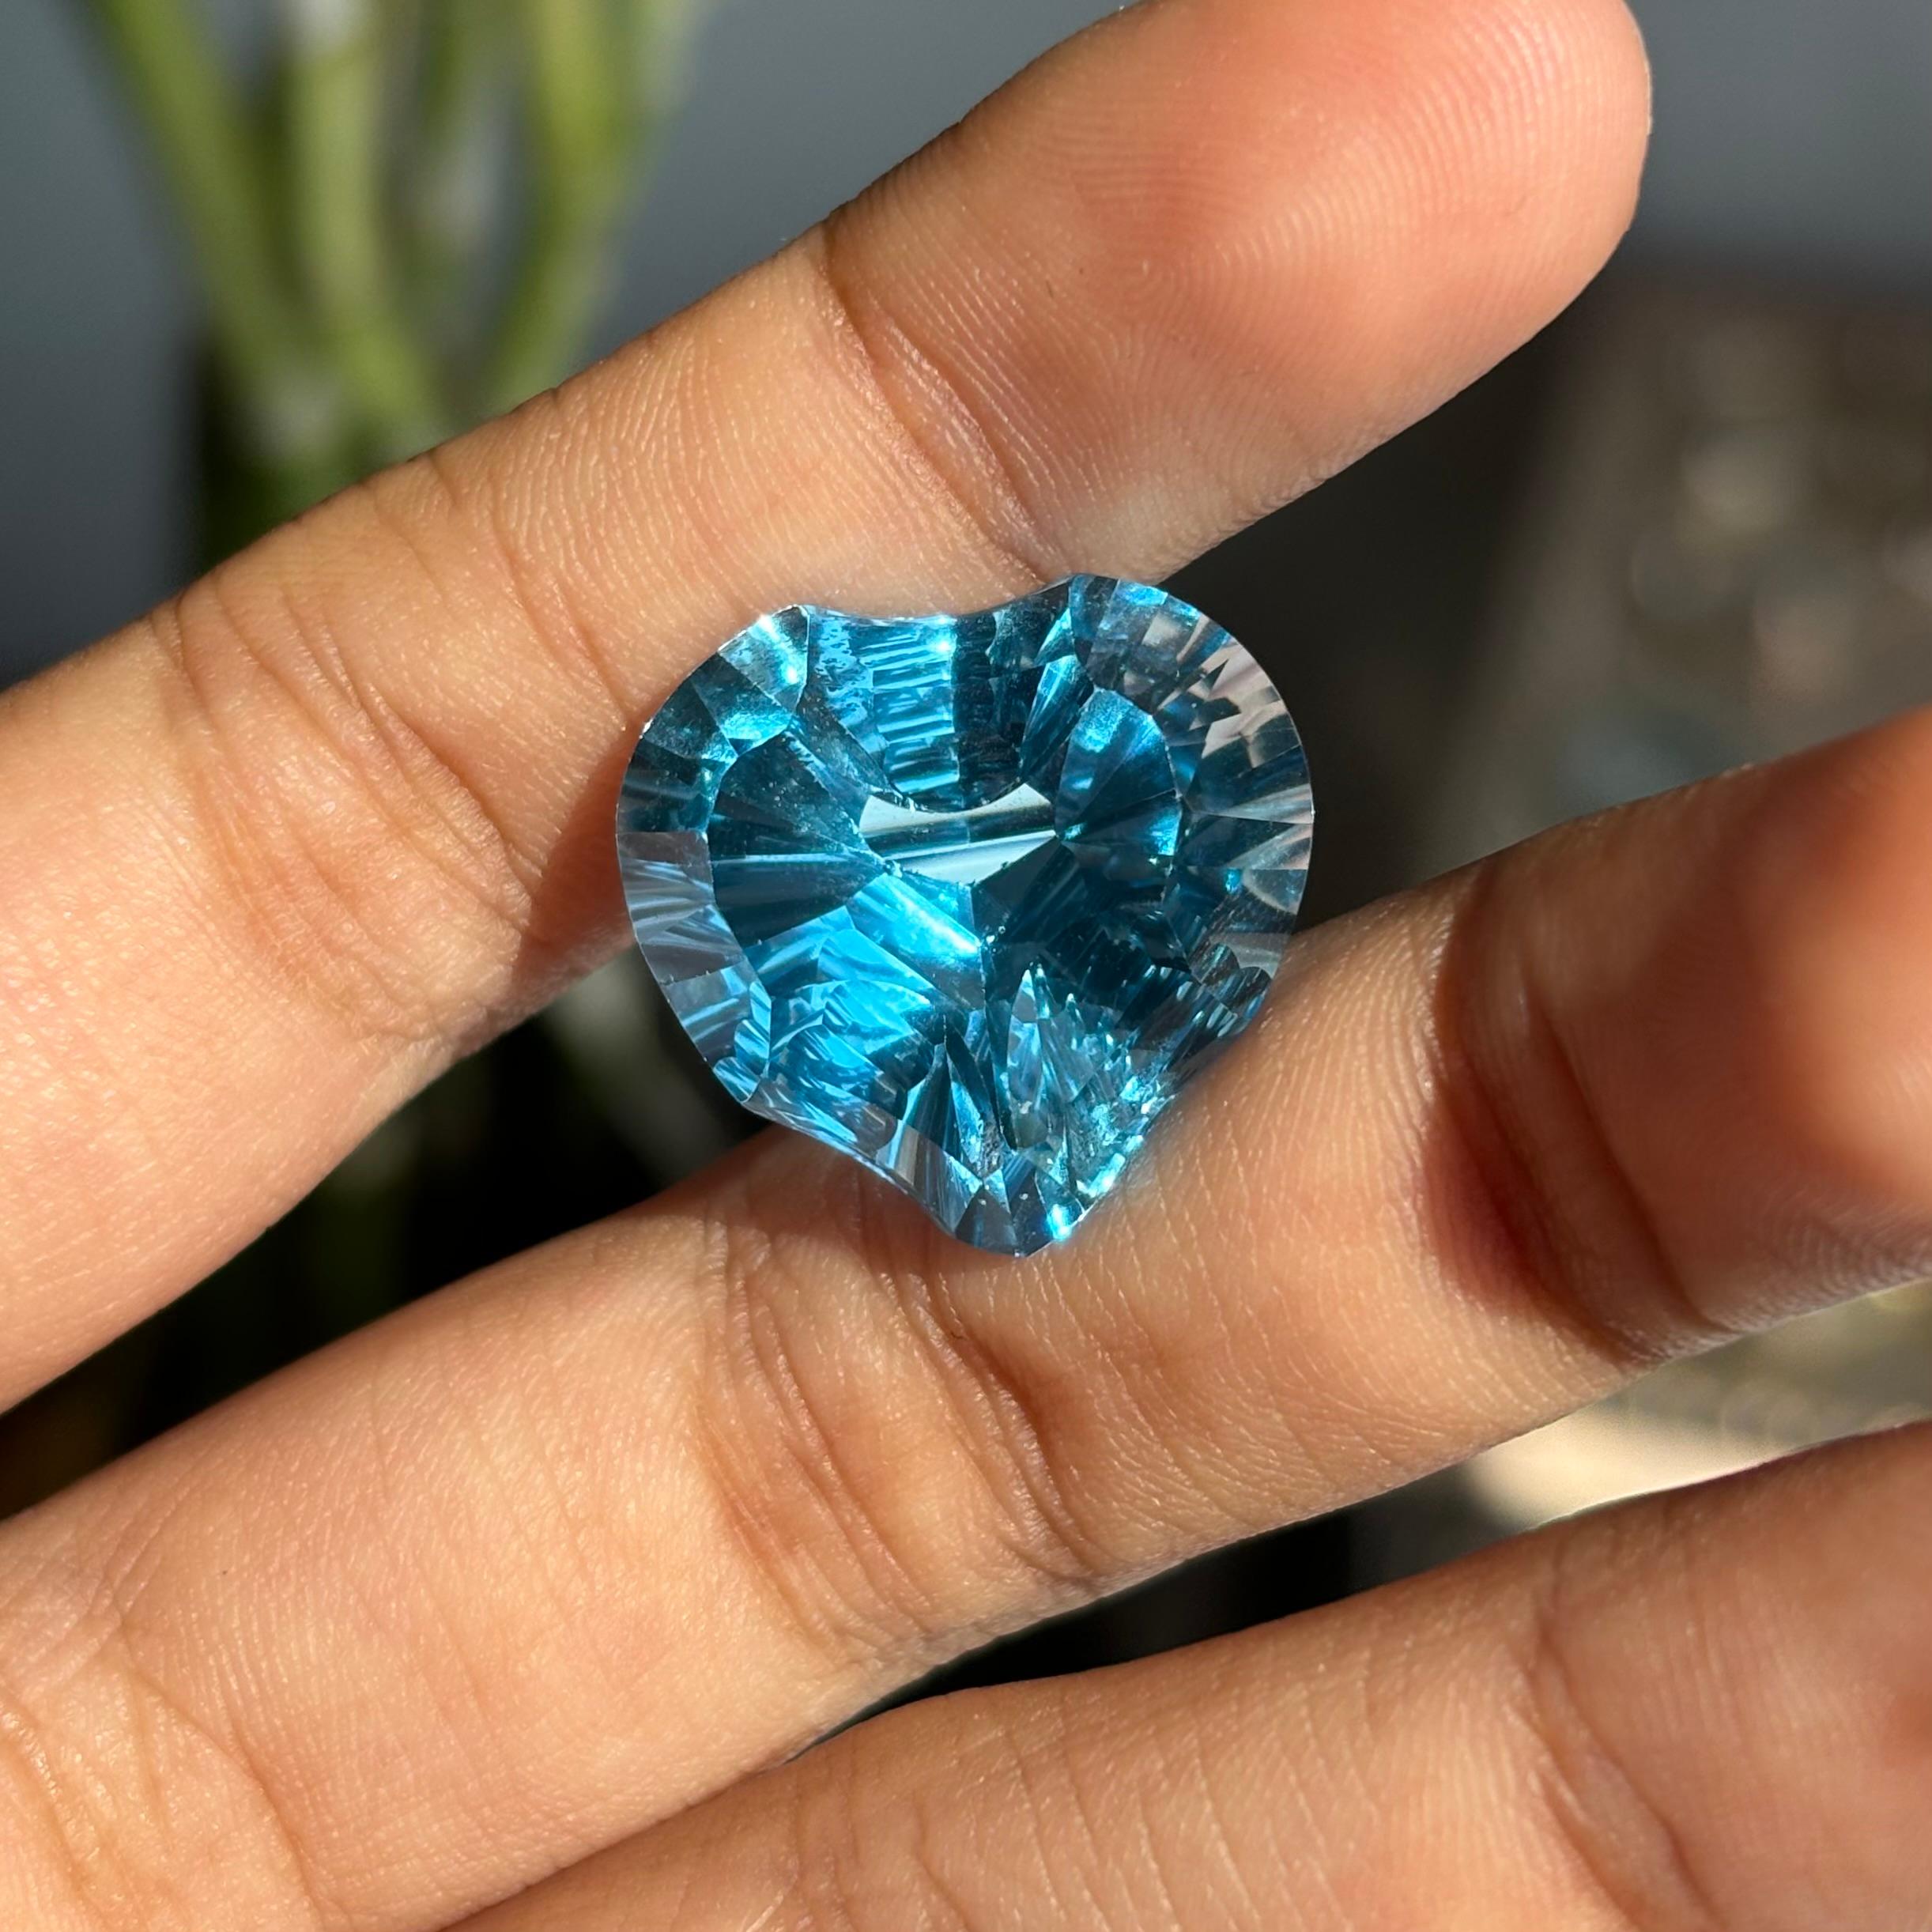 Heart Cut 24.12 Carat Natural Blue Heart Shaped Topaz Stone For Sale